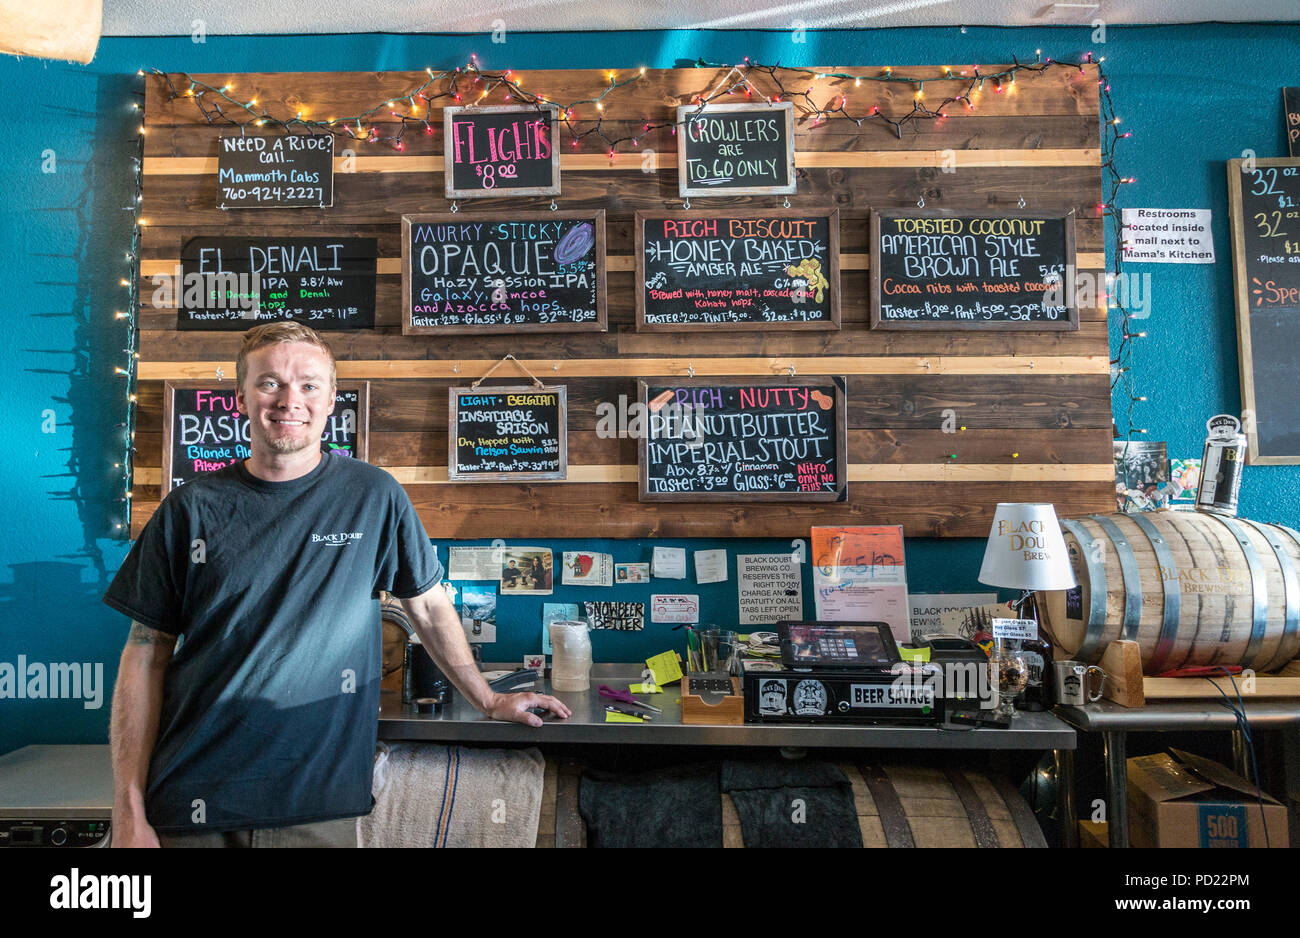 Owner Drew Wallace in Black Doubt, a nano-brewery in Mammoth Lakes with a wide range of specialty beers inclluding some truly unique ones including 'Peanut Butter Imperial Stout.' Stock Photo